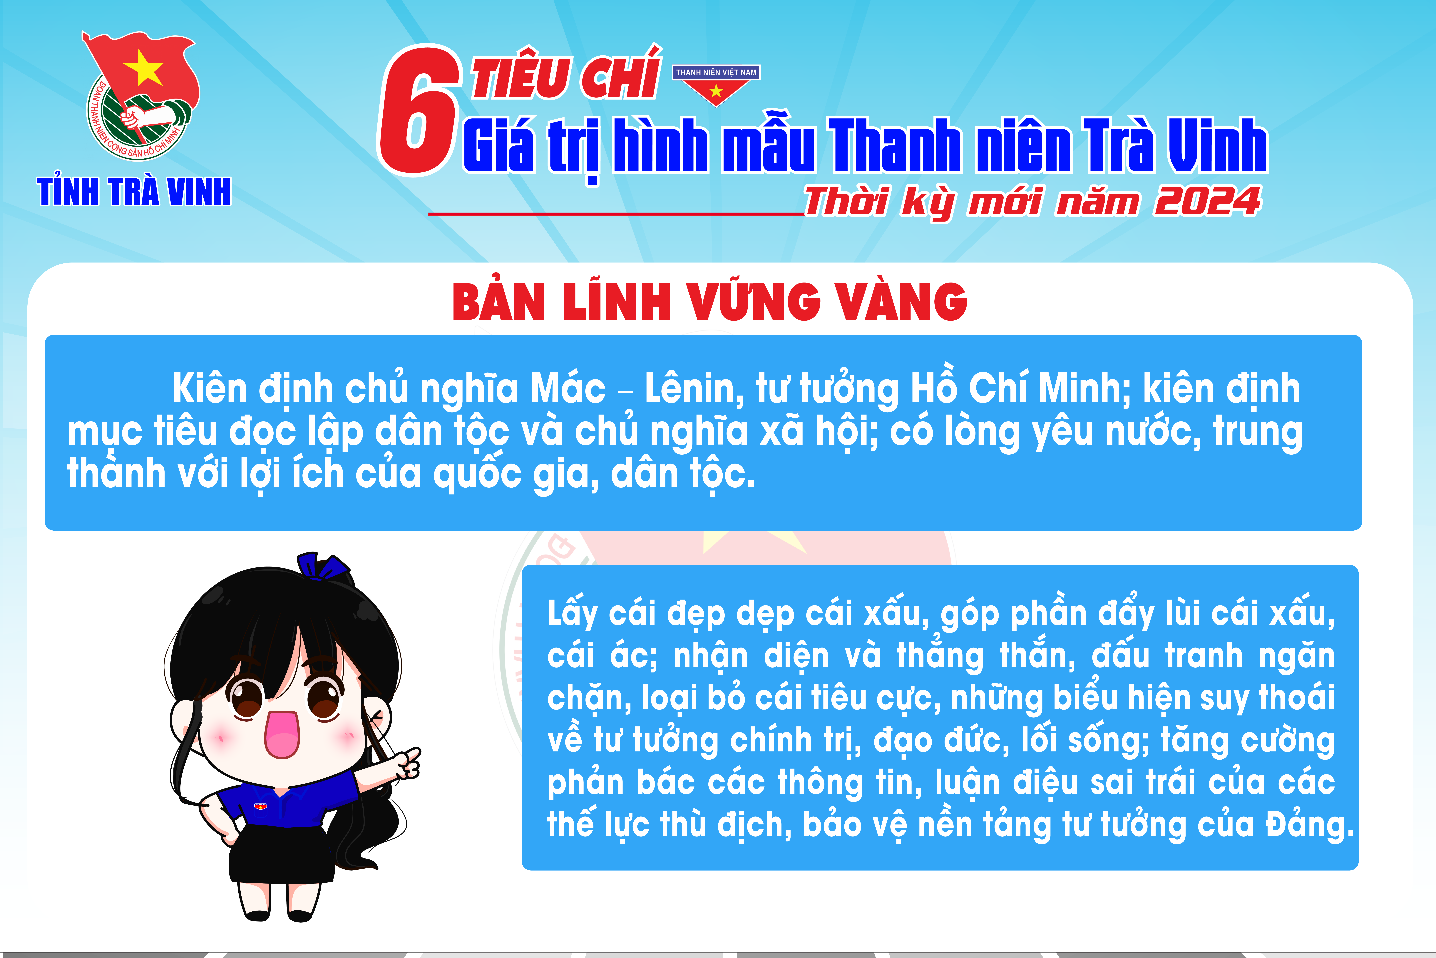 A cartoon character with blue and red text

Description automatically generated